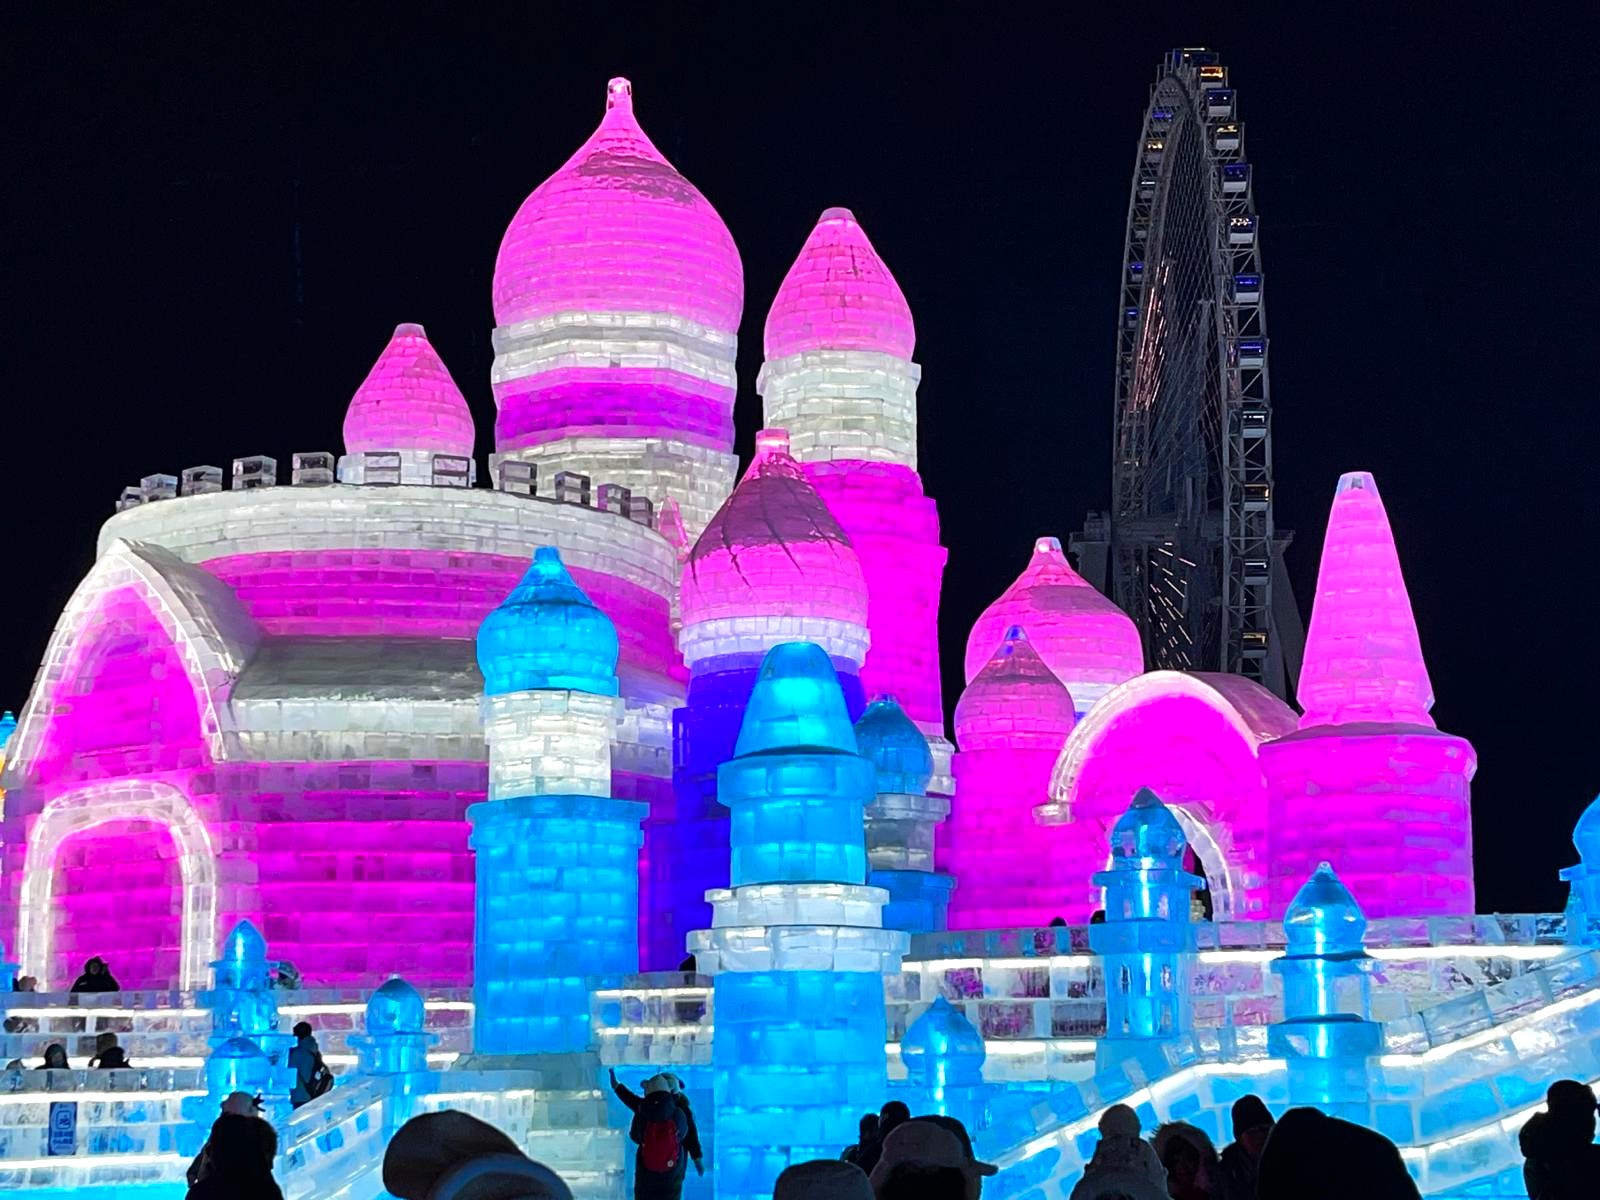 How to visit Harbin Ice and Snow World in China – the most incredible winter wonderland on earth!